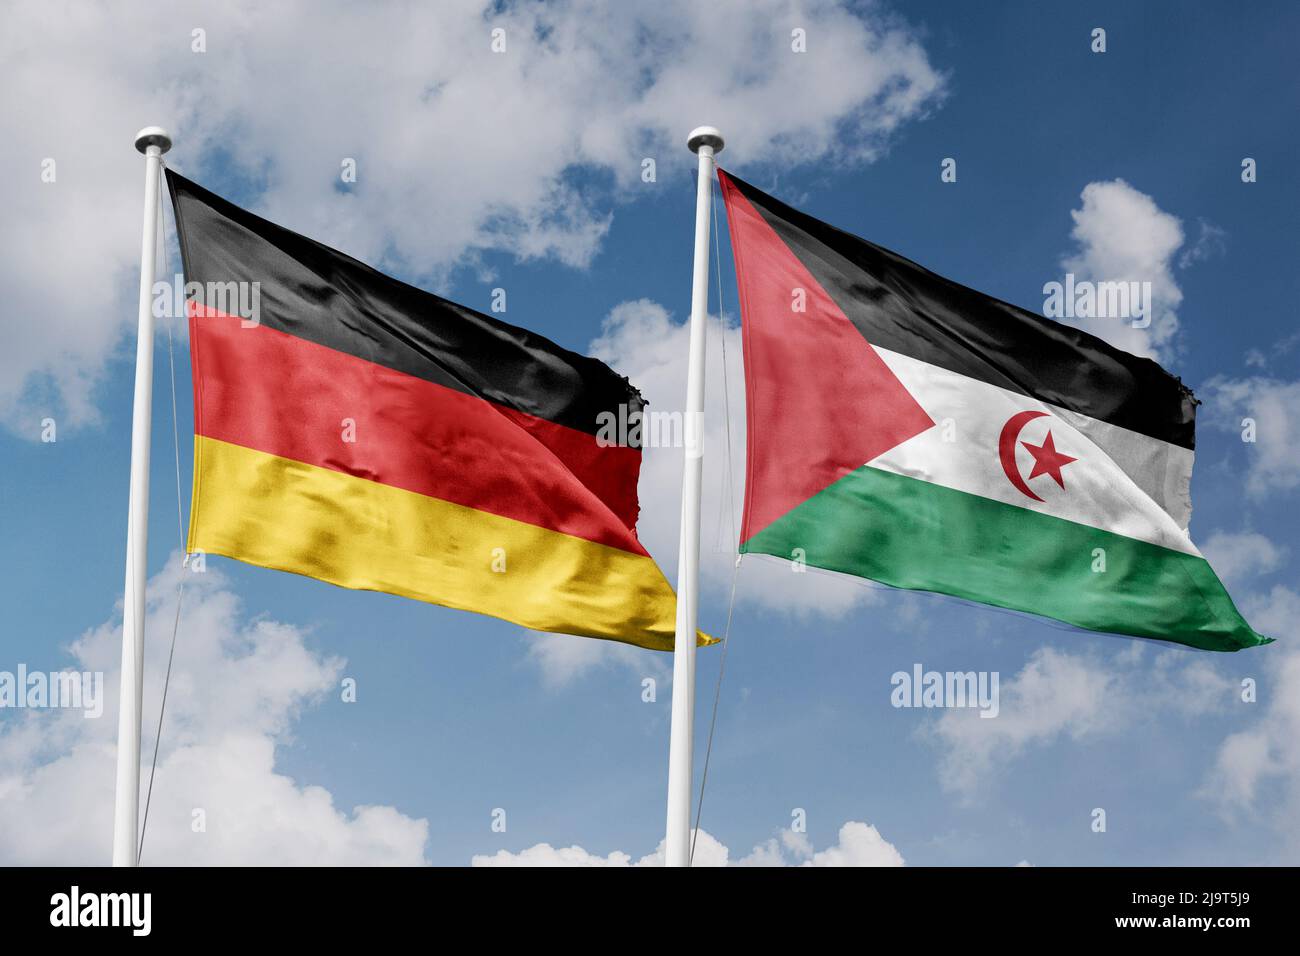 Germany and Sahrawi Arab Democratic Republic two flags on flagpoles and blue cloudy sky background Stock Photo